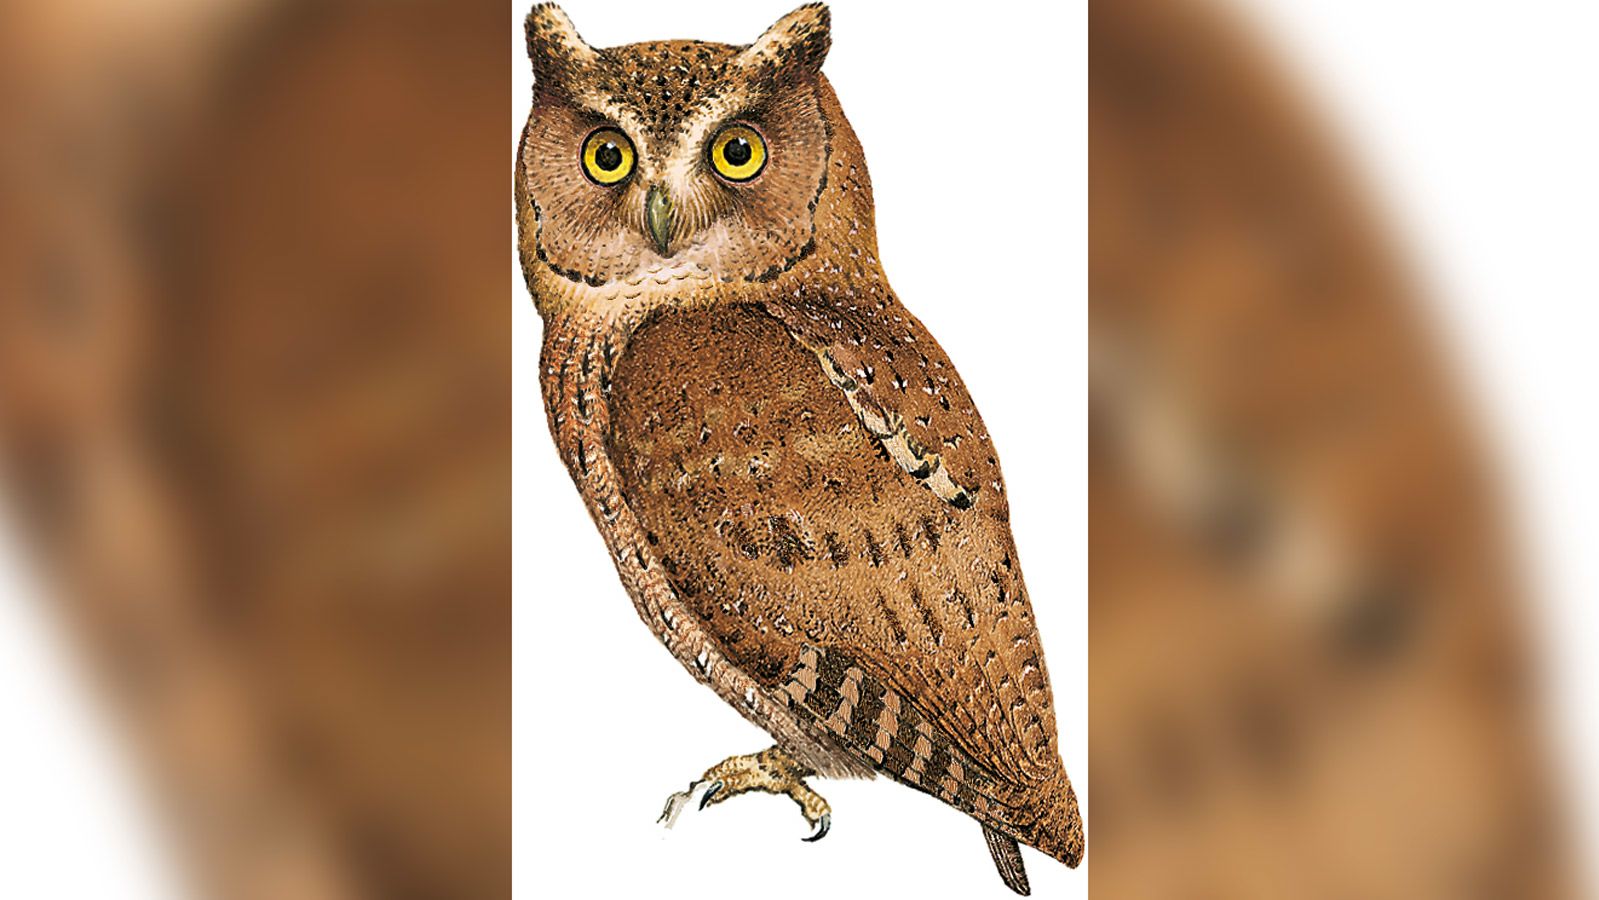 The Siau scops-owl was last spotted in 1866 in Indonesia.